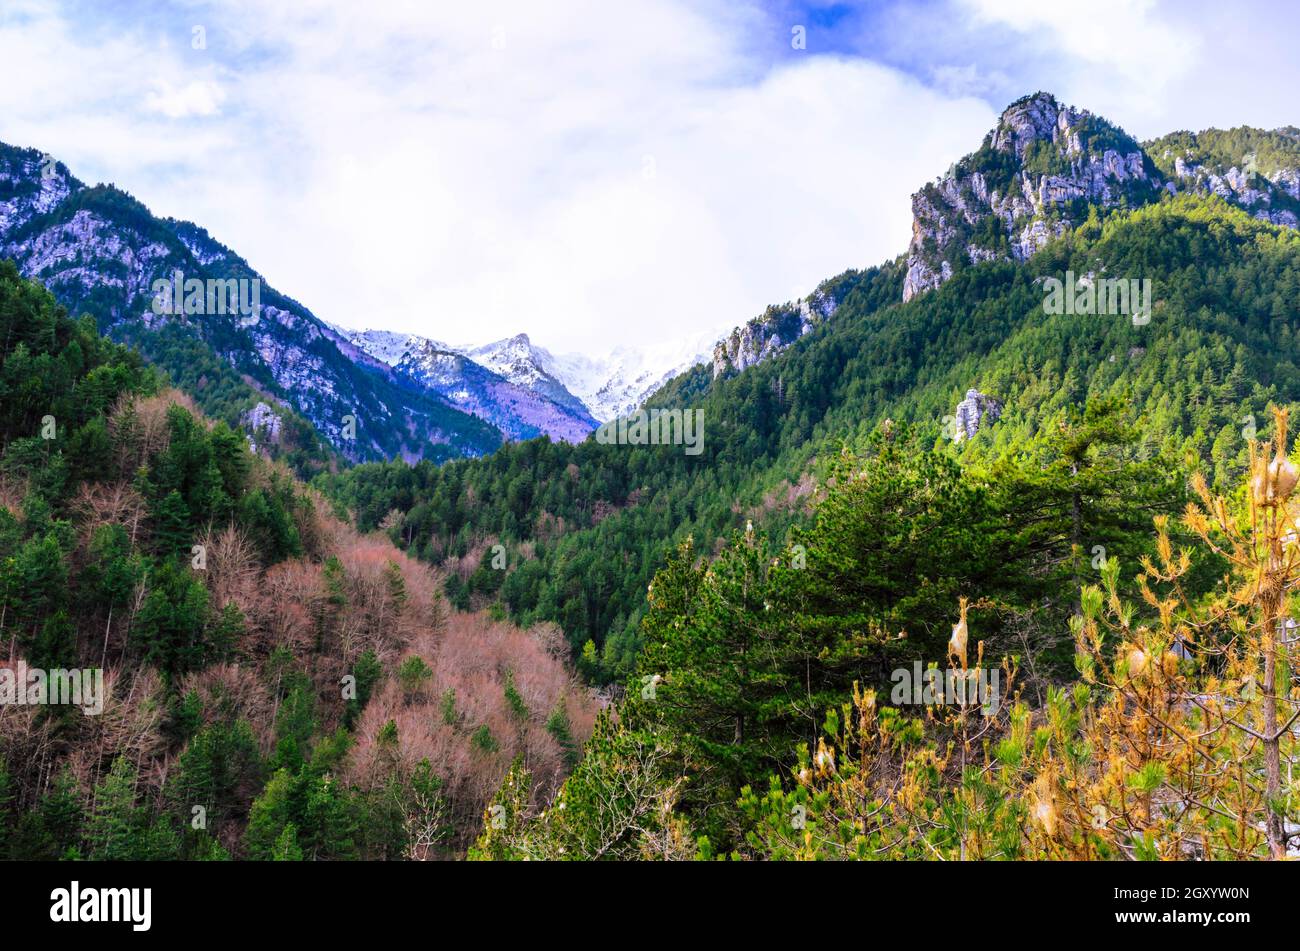 Amazing landscape on Mount Olympus, the highest mountain in Greece and the home of Zeus and the Greek gods. Stock Photo